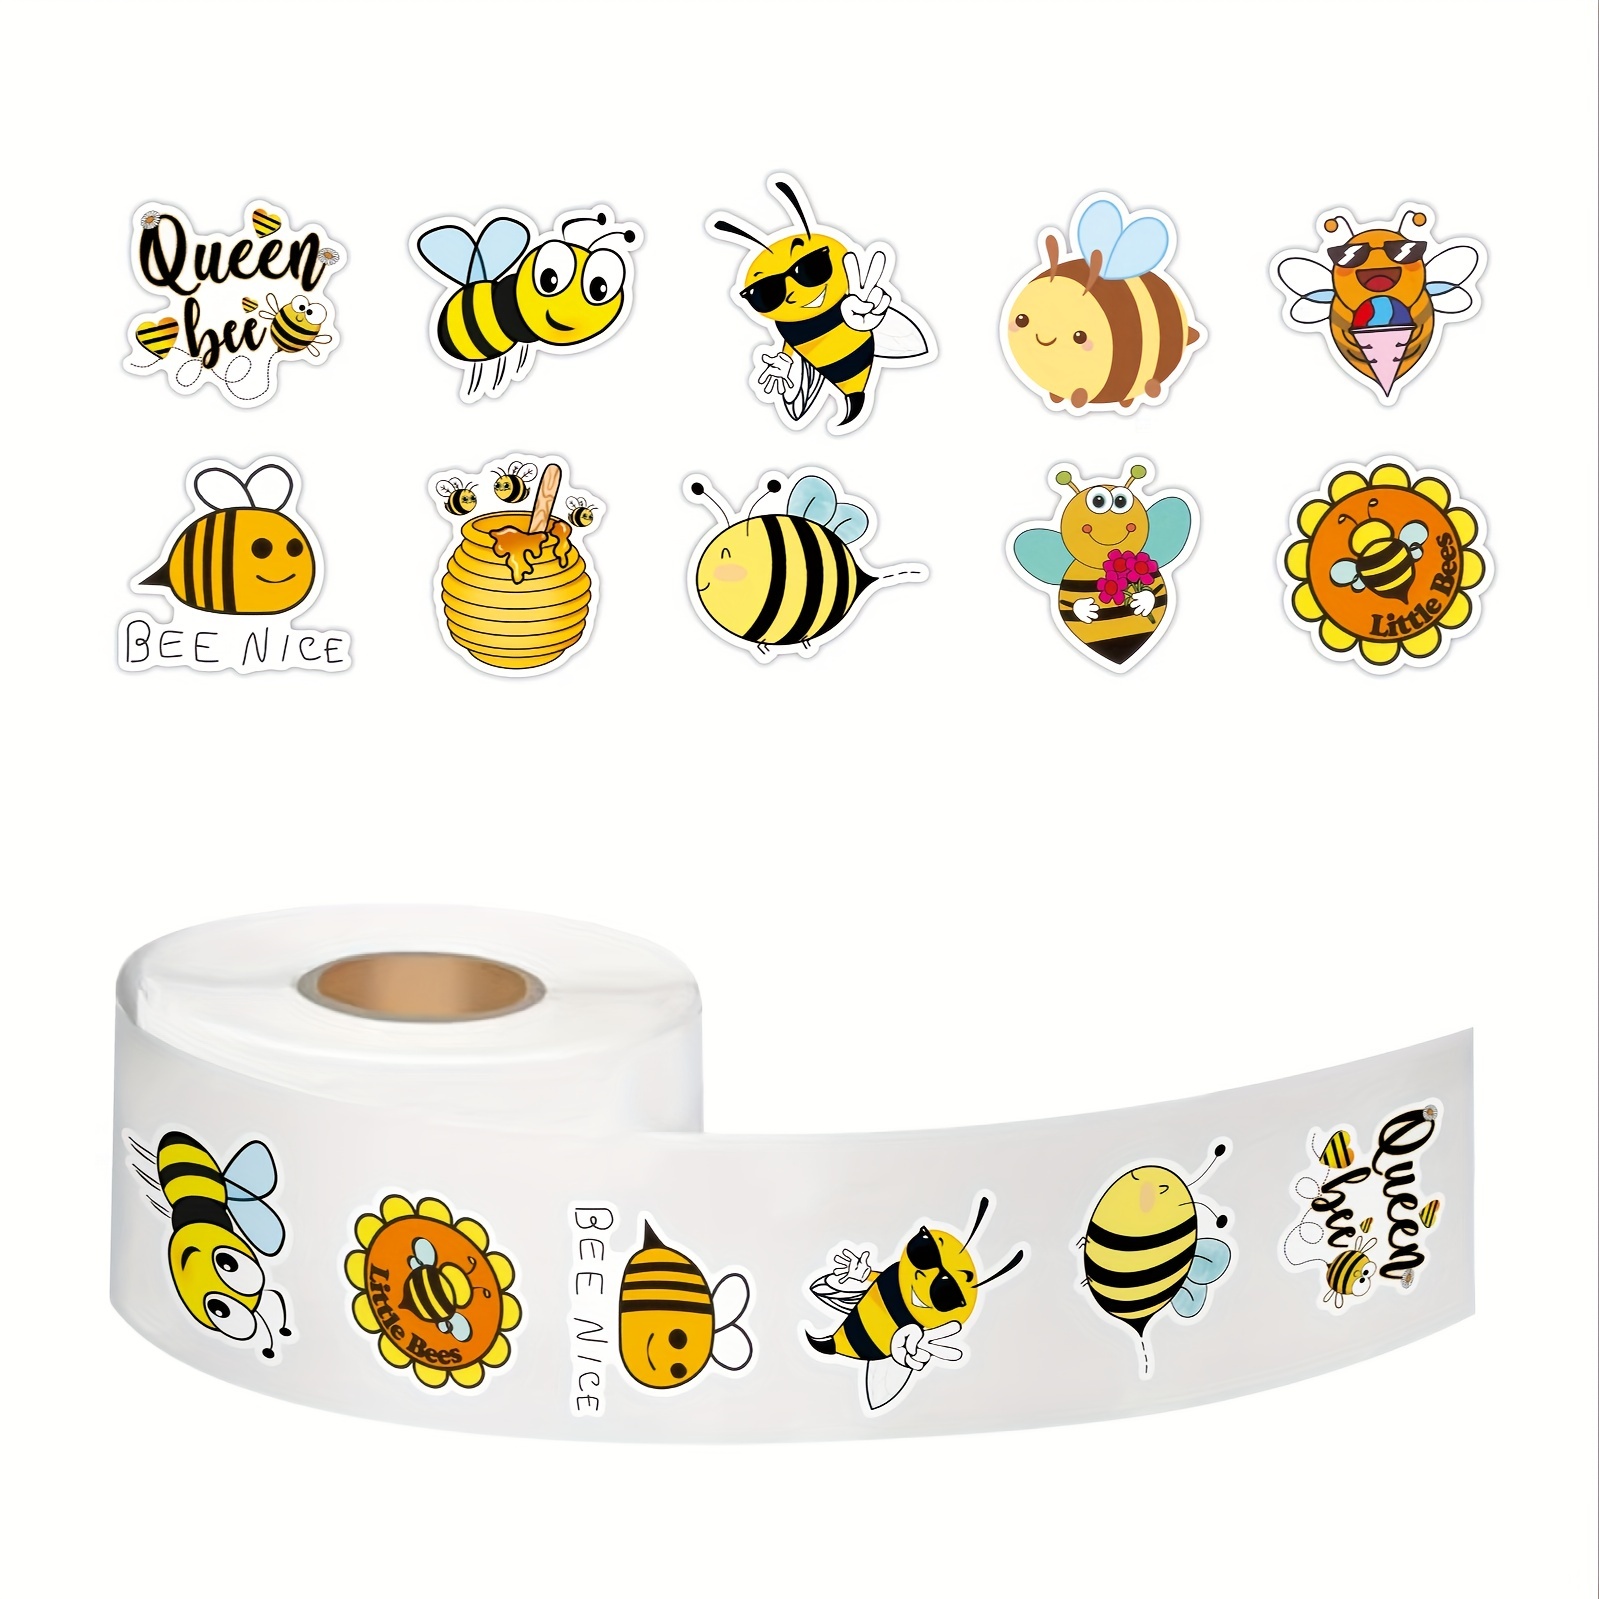 

500pcs Bee Theme Stickers Roll For Bumble Bee Honey Stickers Cute Summer Bee Decals For Teachers Students Reward Spring